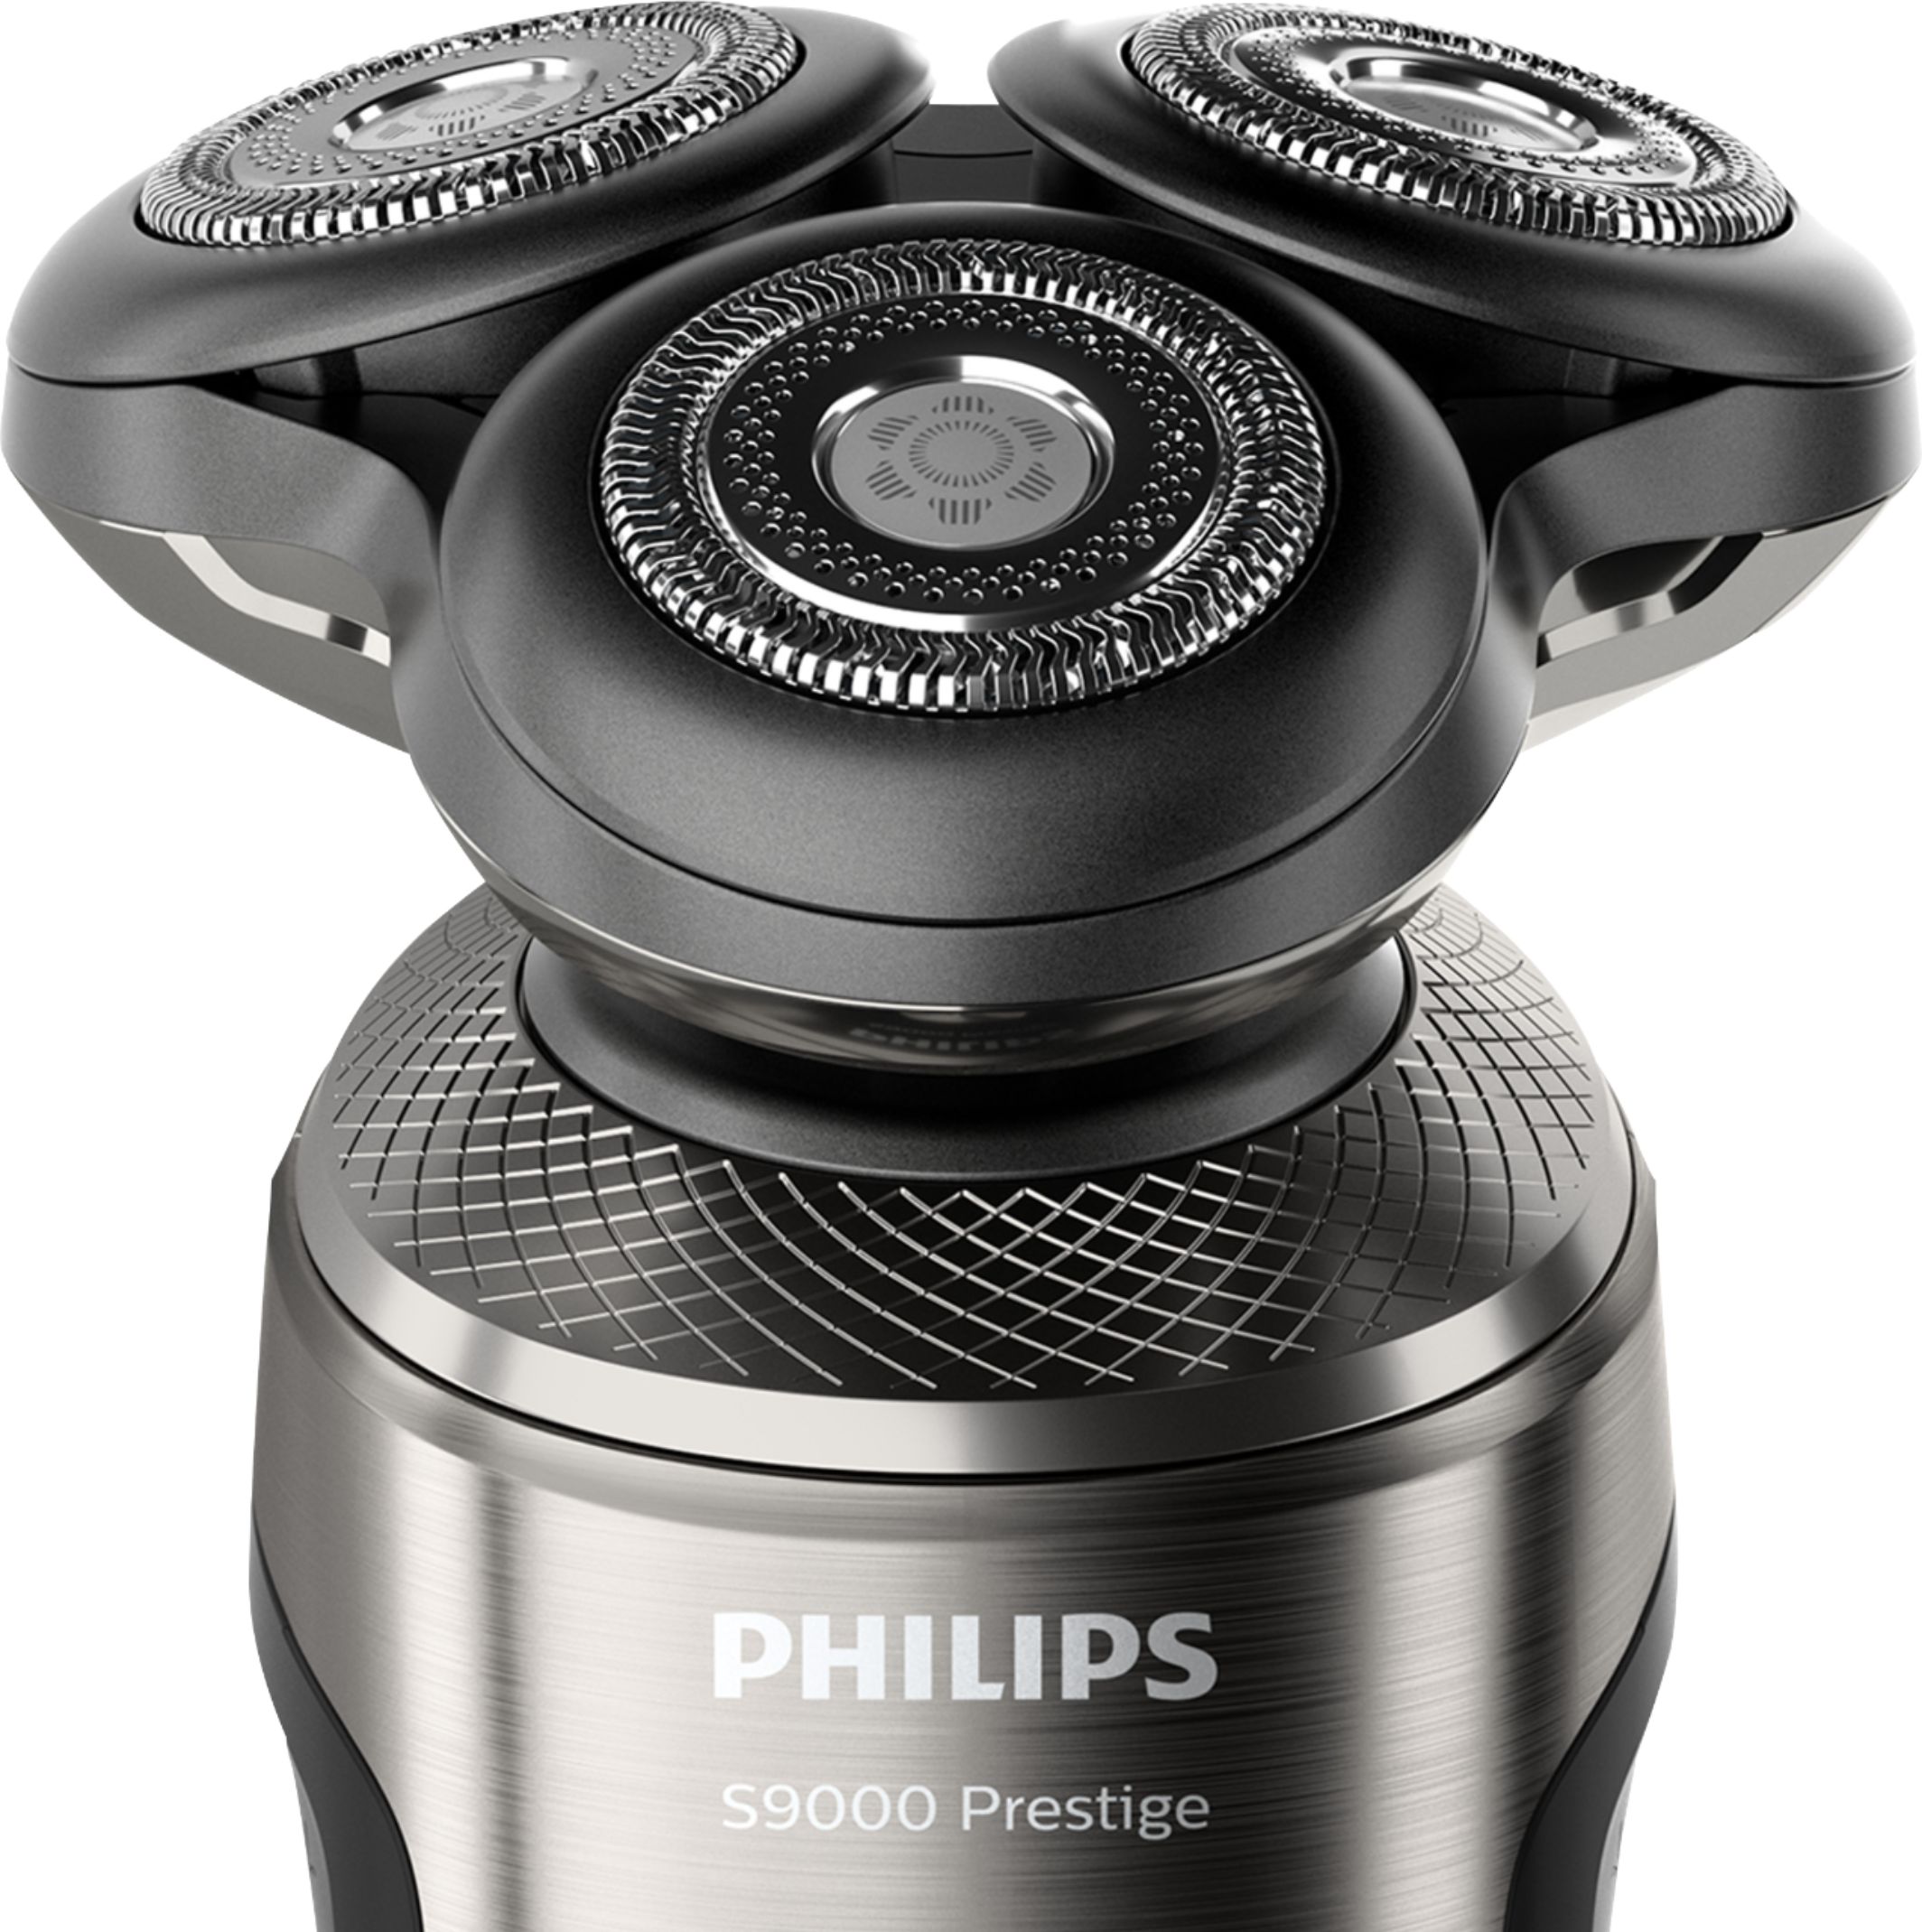 Angle View: Philips Norelco - SH98/72 Replacement Head for Shaver 9000 Prestige - Silver